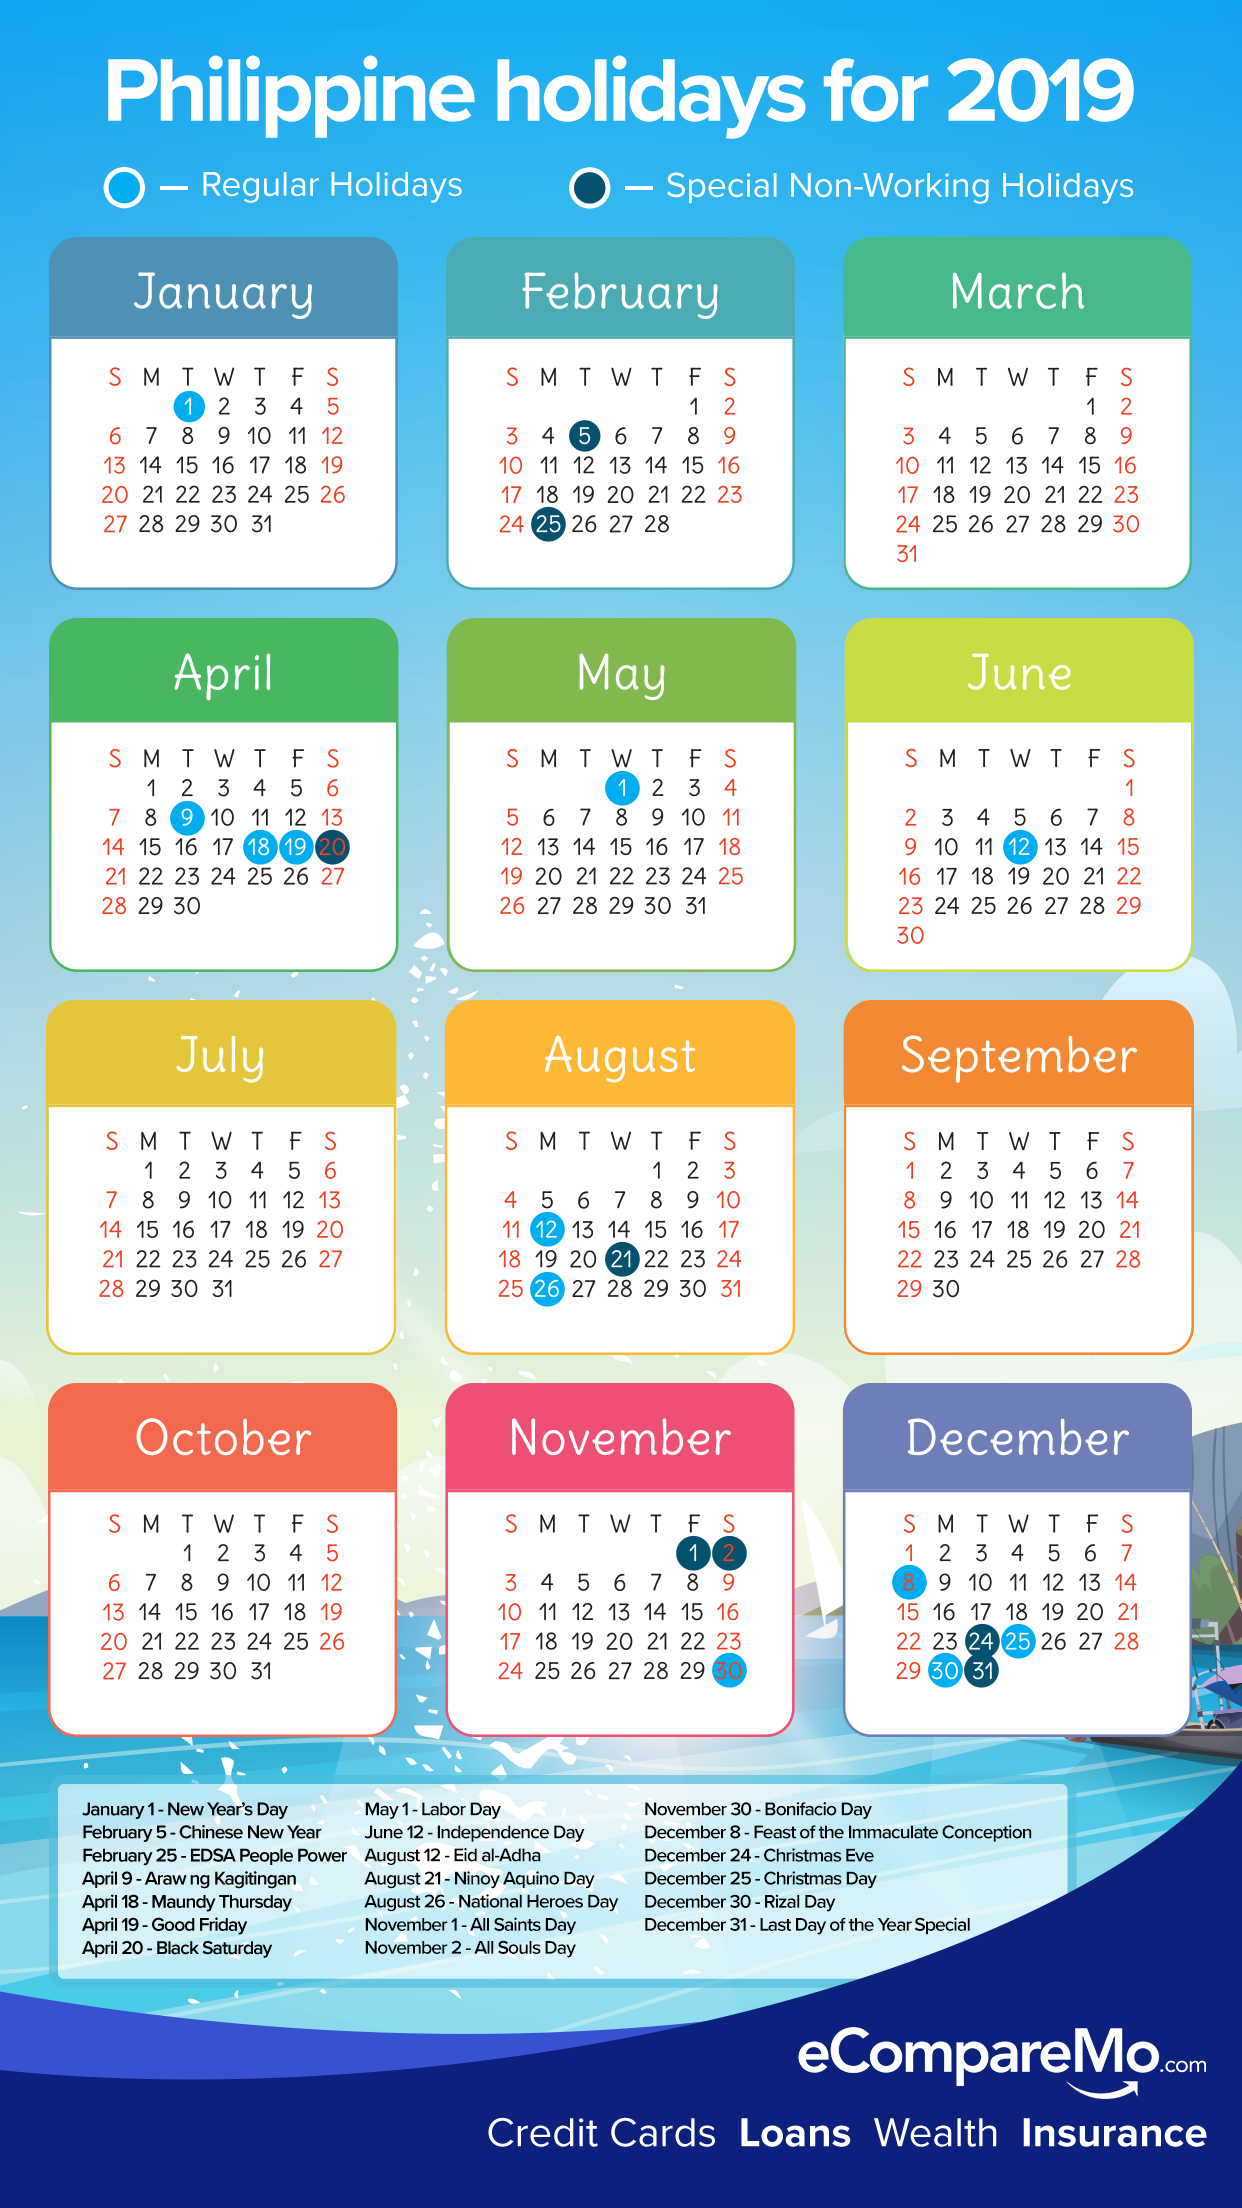 Updated: Official List Of 2019 Philippine Holidays